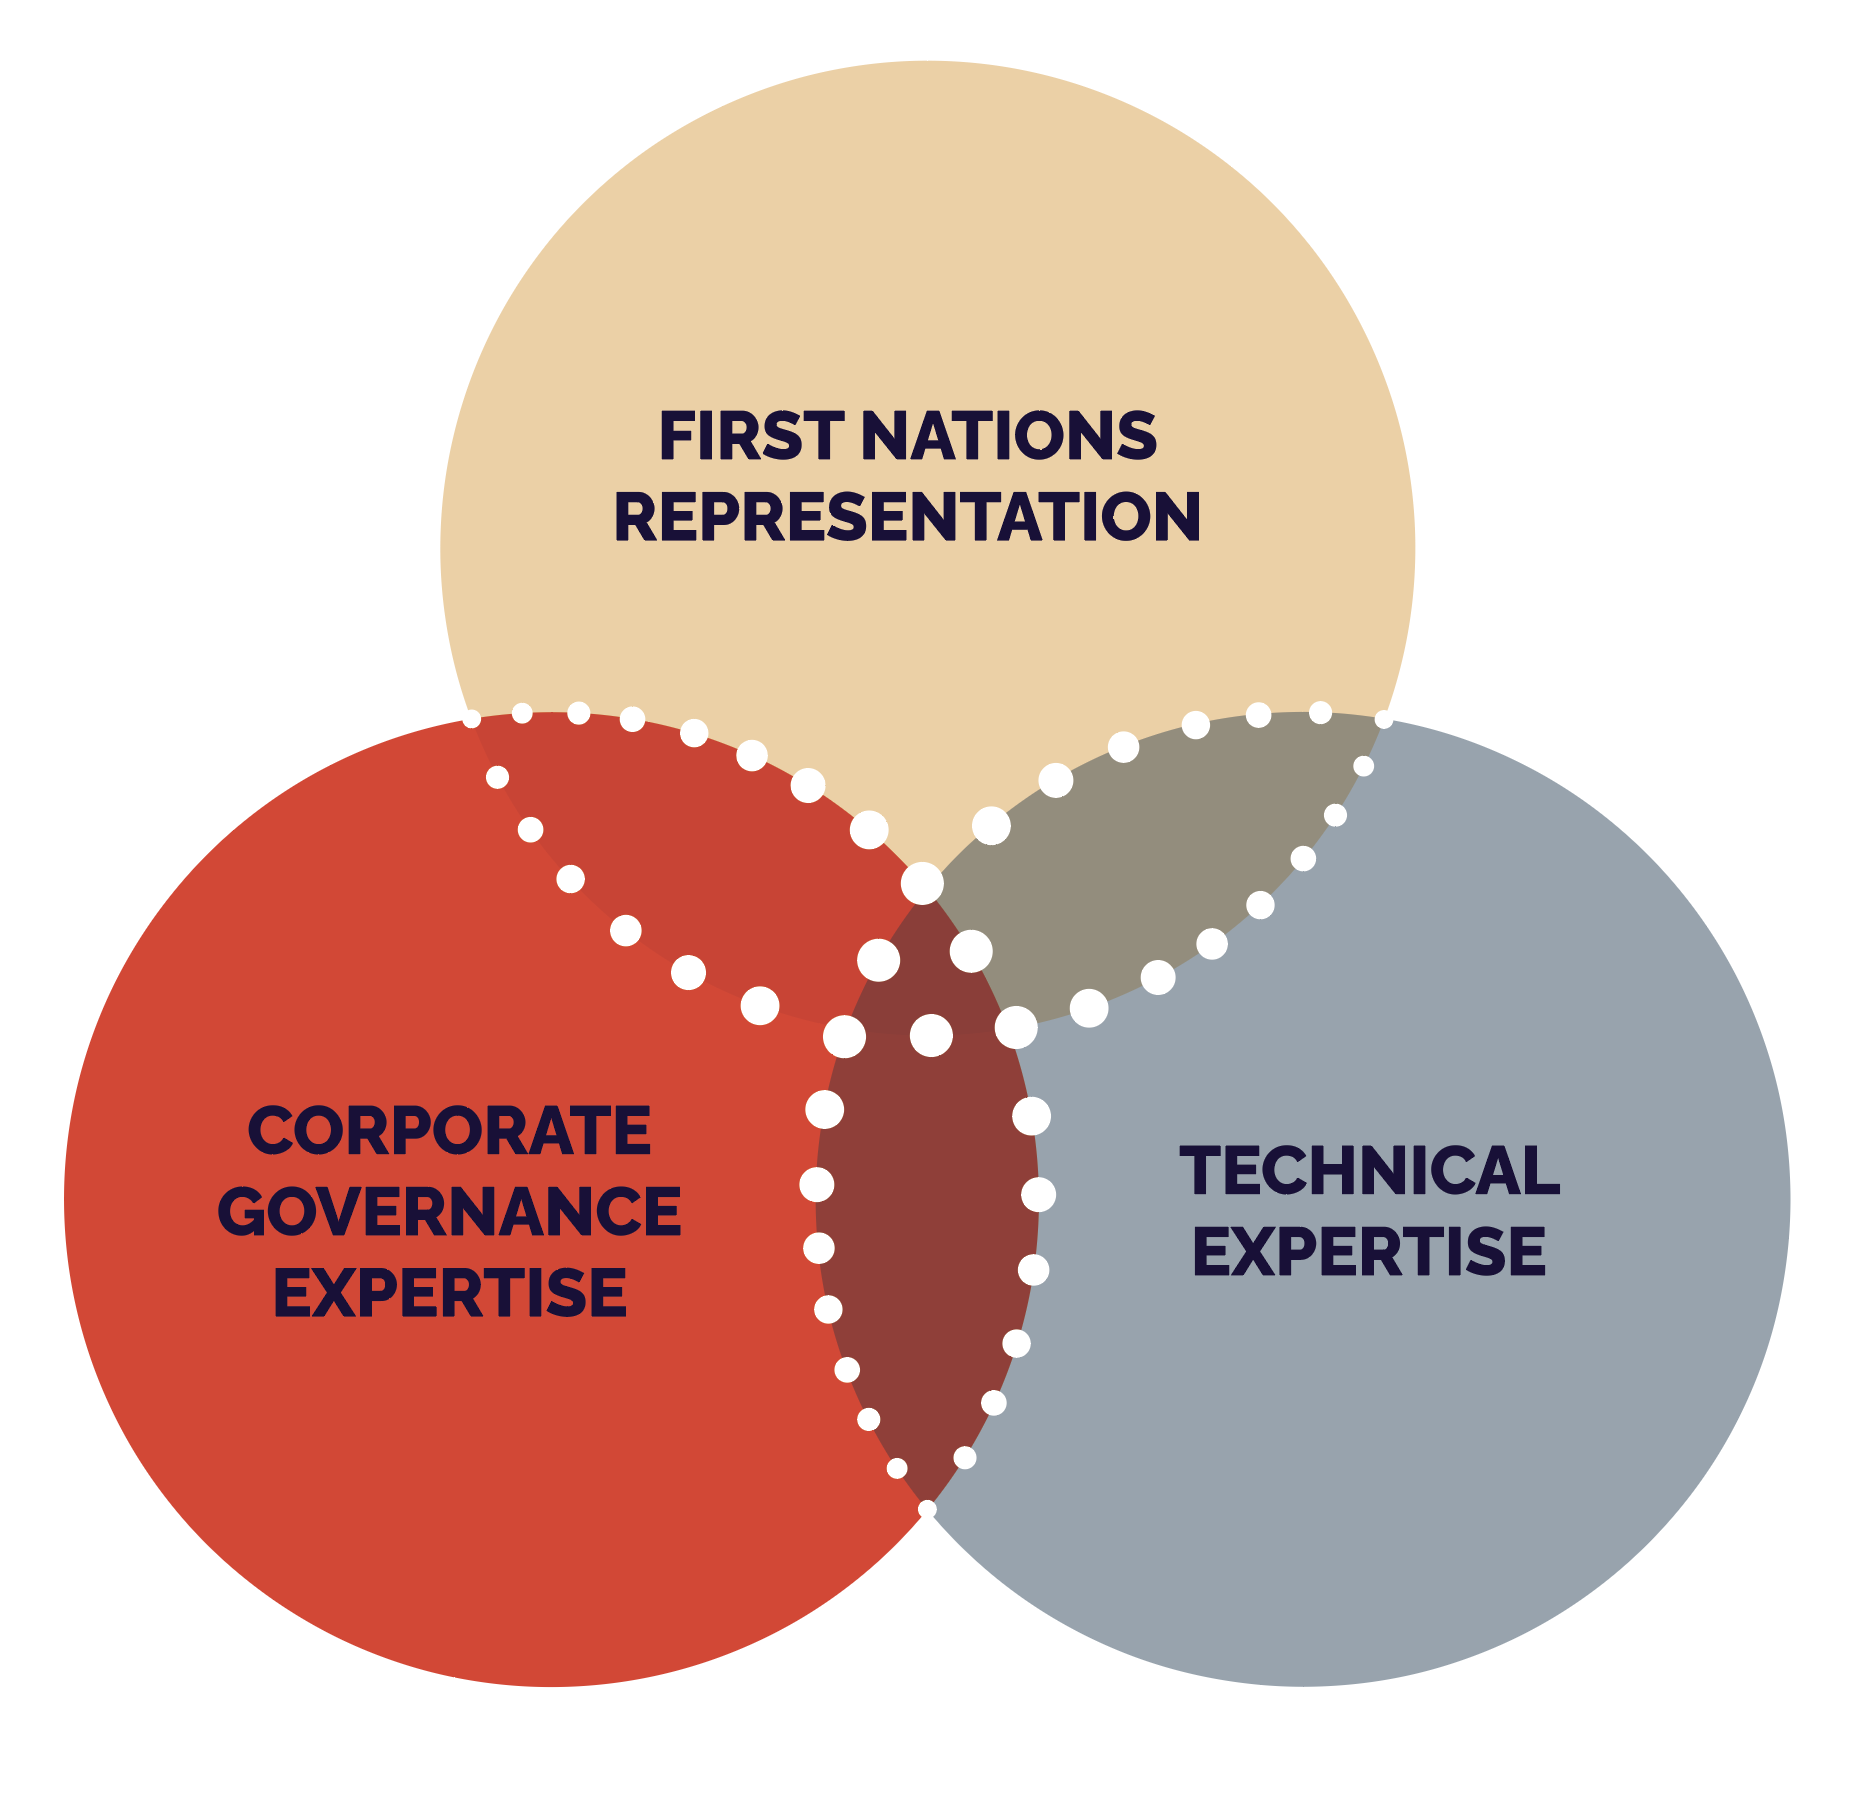 A venn diagram shows First Nations Representation, Corporate Governance Expertise, and Technical Expertise intersecting equally as three large circles